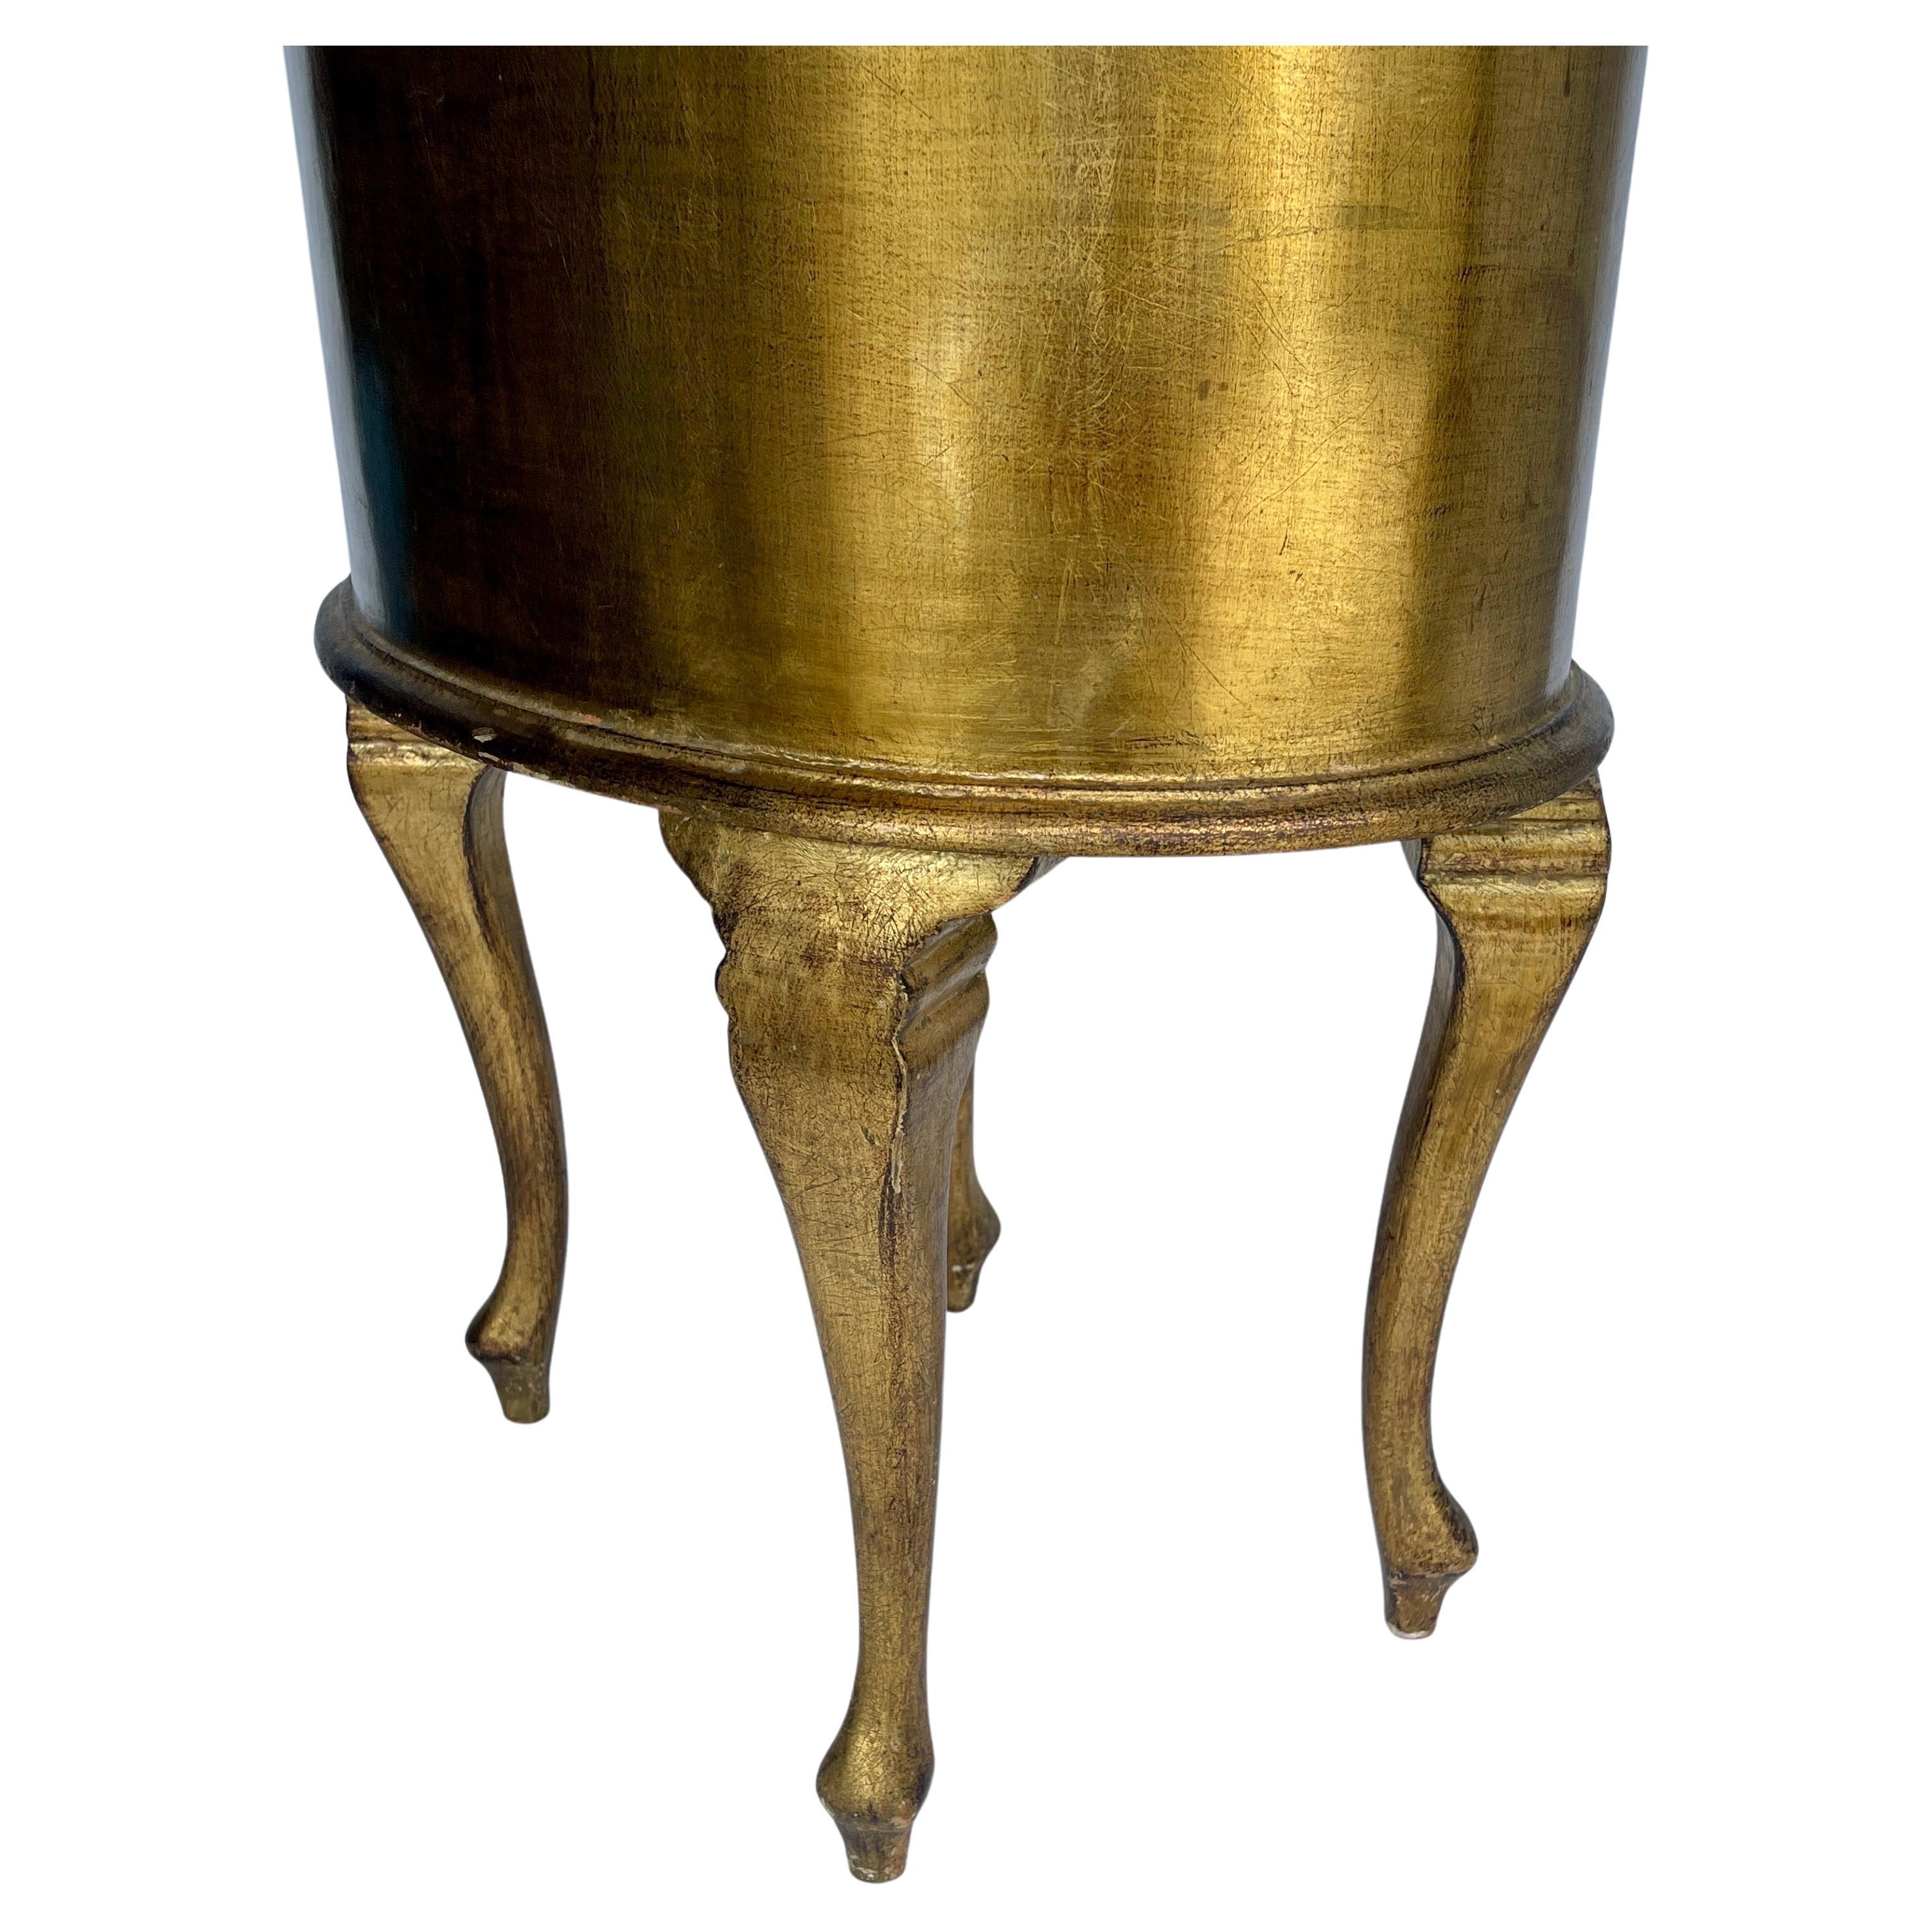 Wood Mid-Century Italian Florentine Gilt Side Table With Drawers 